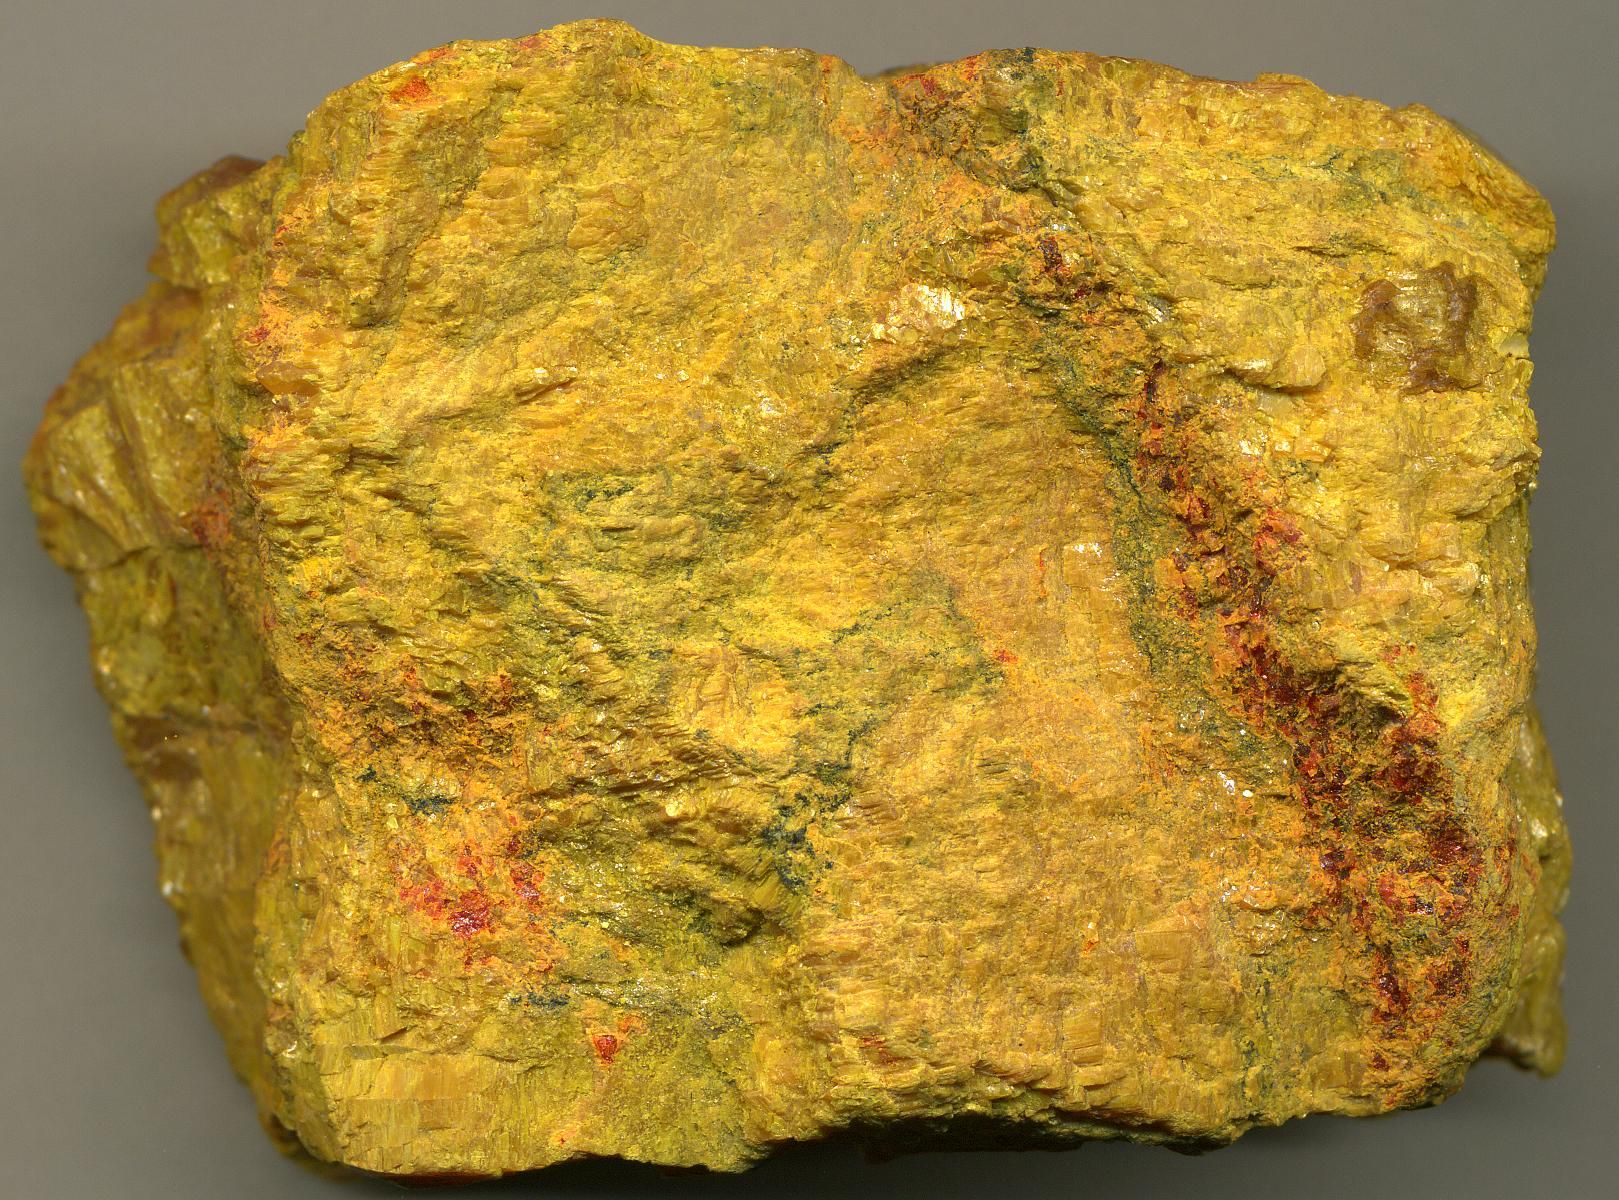 The Toxic Stone Called 'Gold Paint'